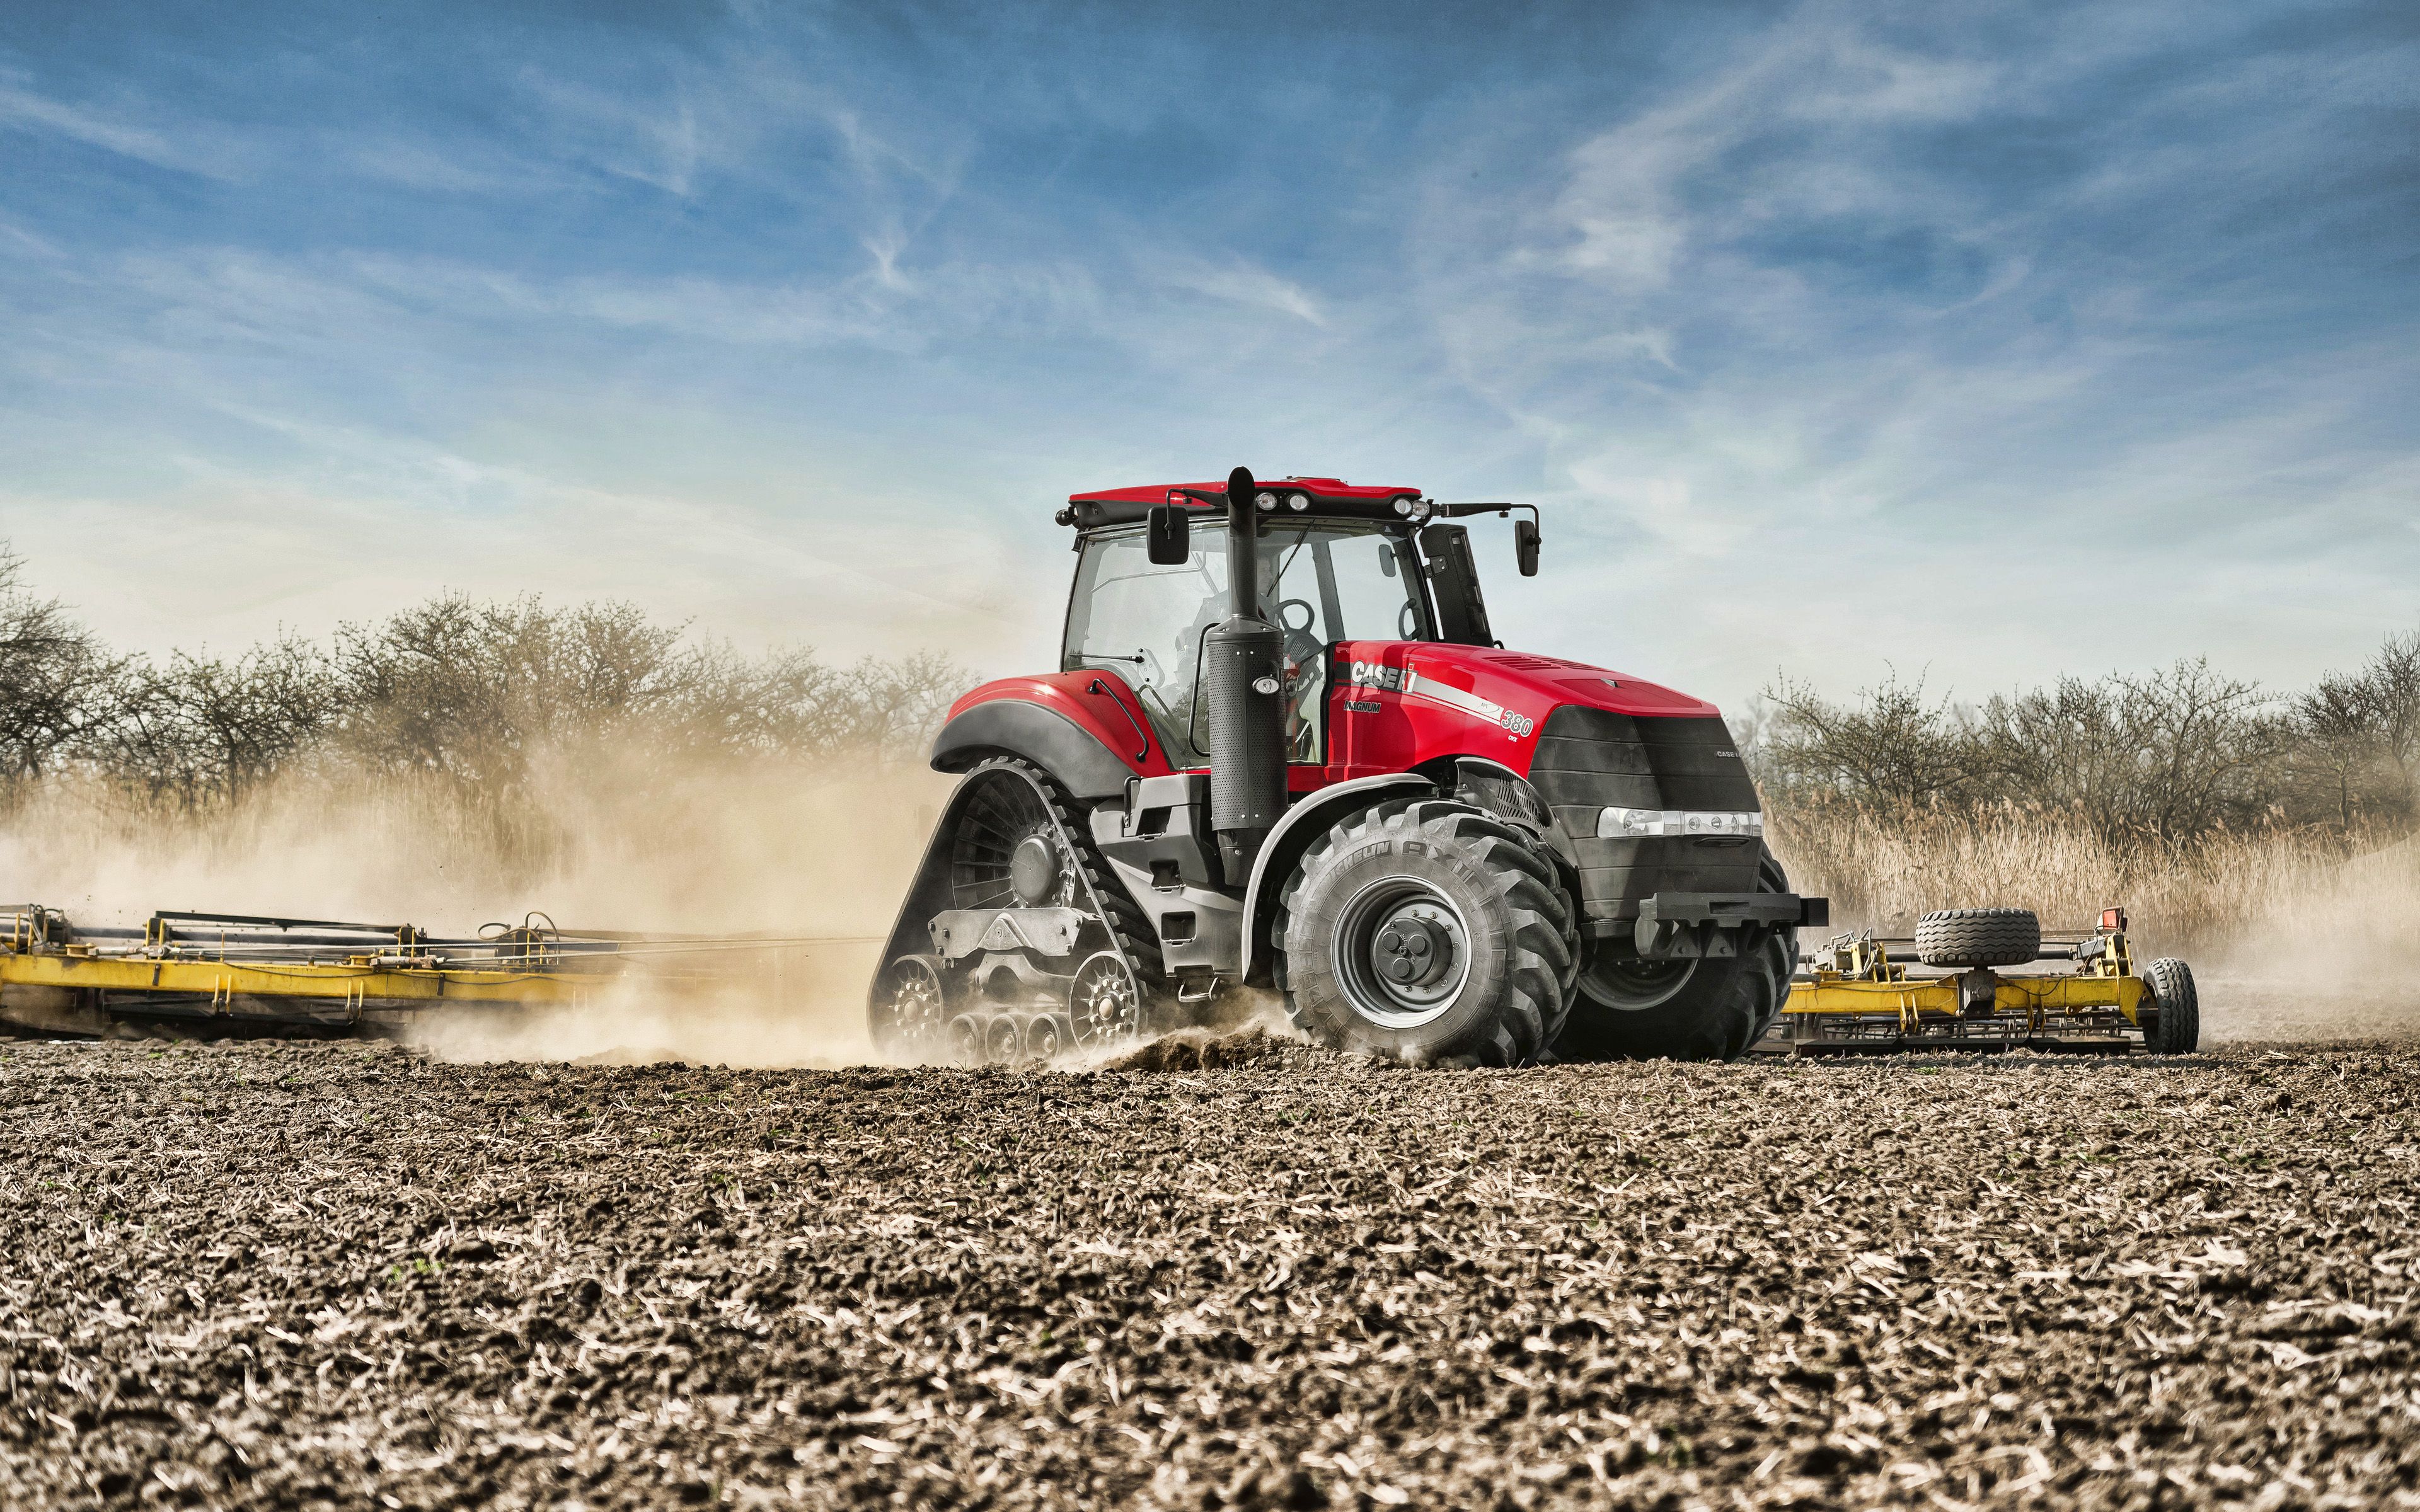 Download wallpaper Case IH Magnum 380 CVT, 4k, plowing field, 2019 tractors, agricultural machinery, HDR, agriculture, harvest, tractor in the field, Case for desktop with resolution 3840x2400. High Quality HD picture wallpaper